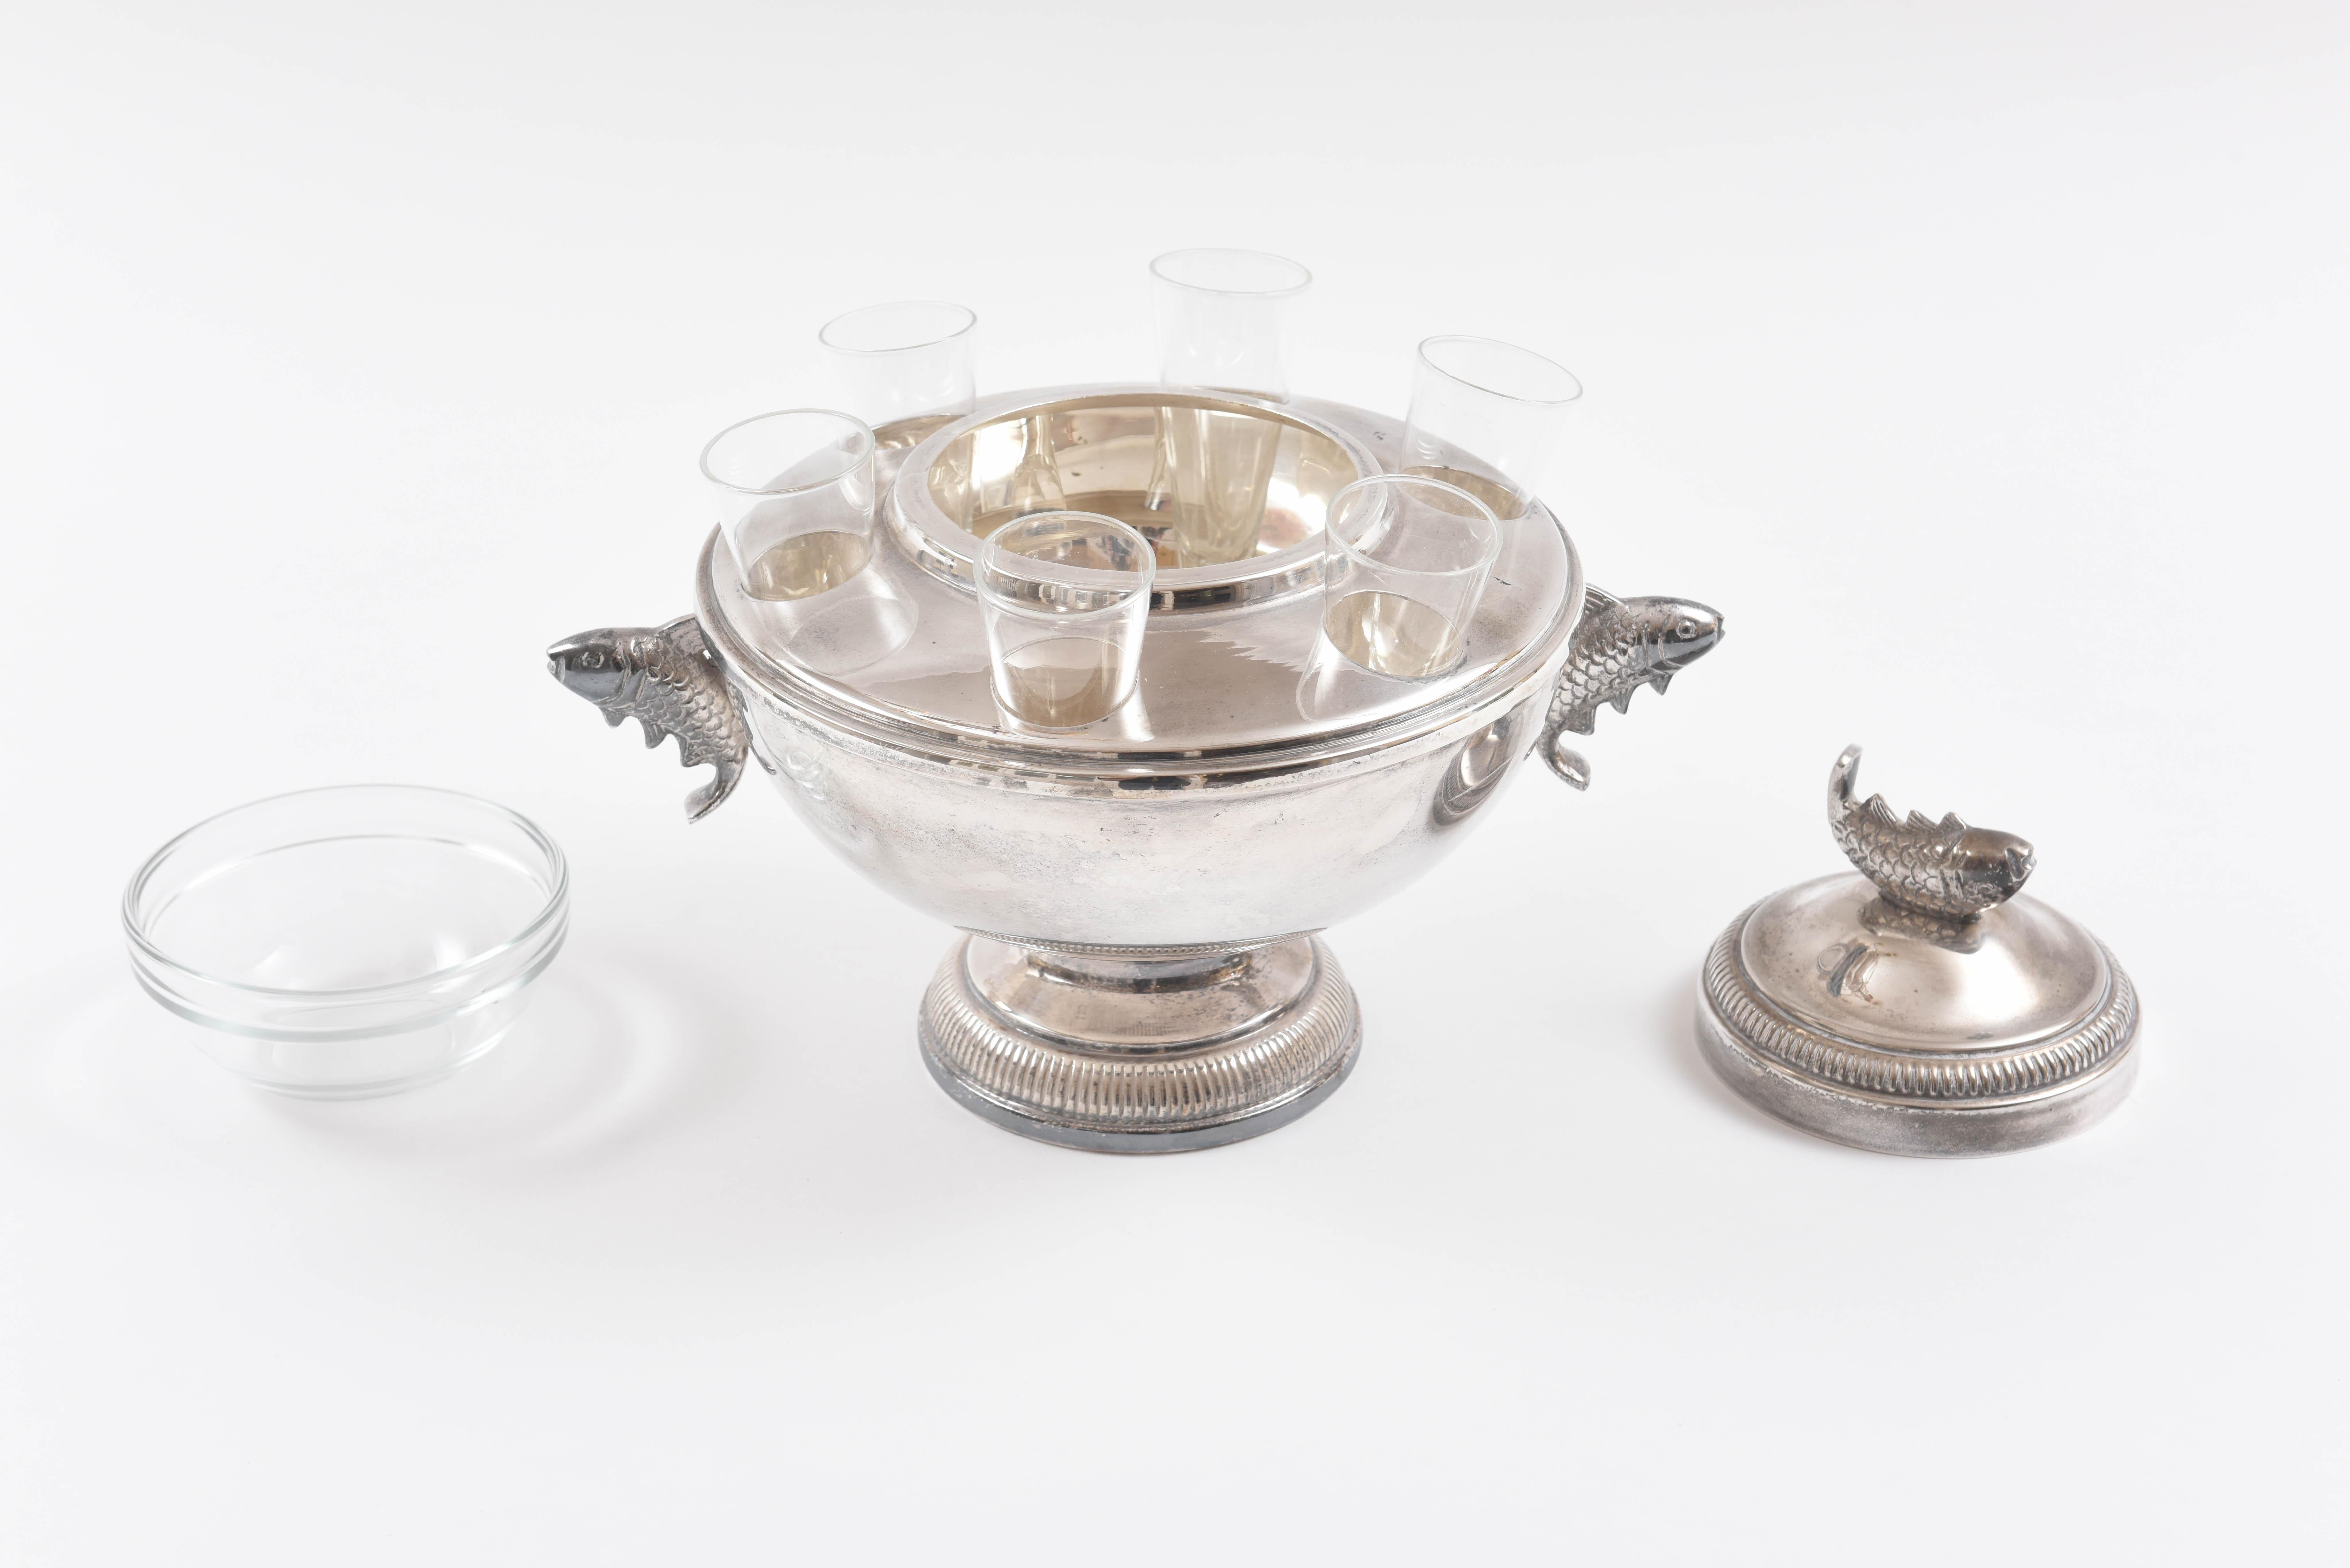 Czech Vintage Caviar & Vodka Server, Silver Plate and Glass with Figural Fish Handles